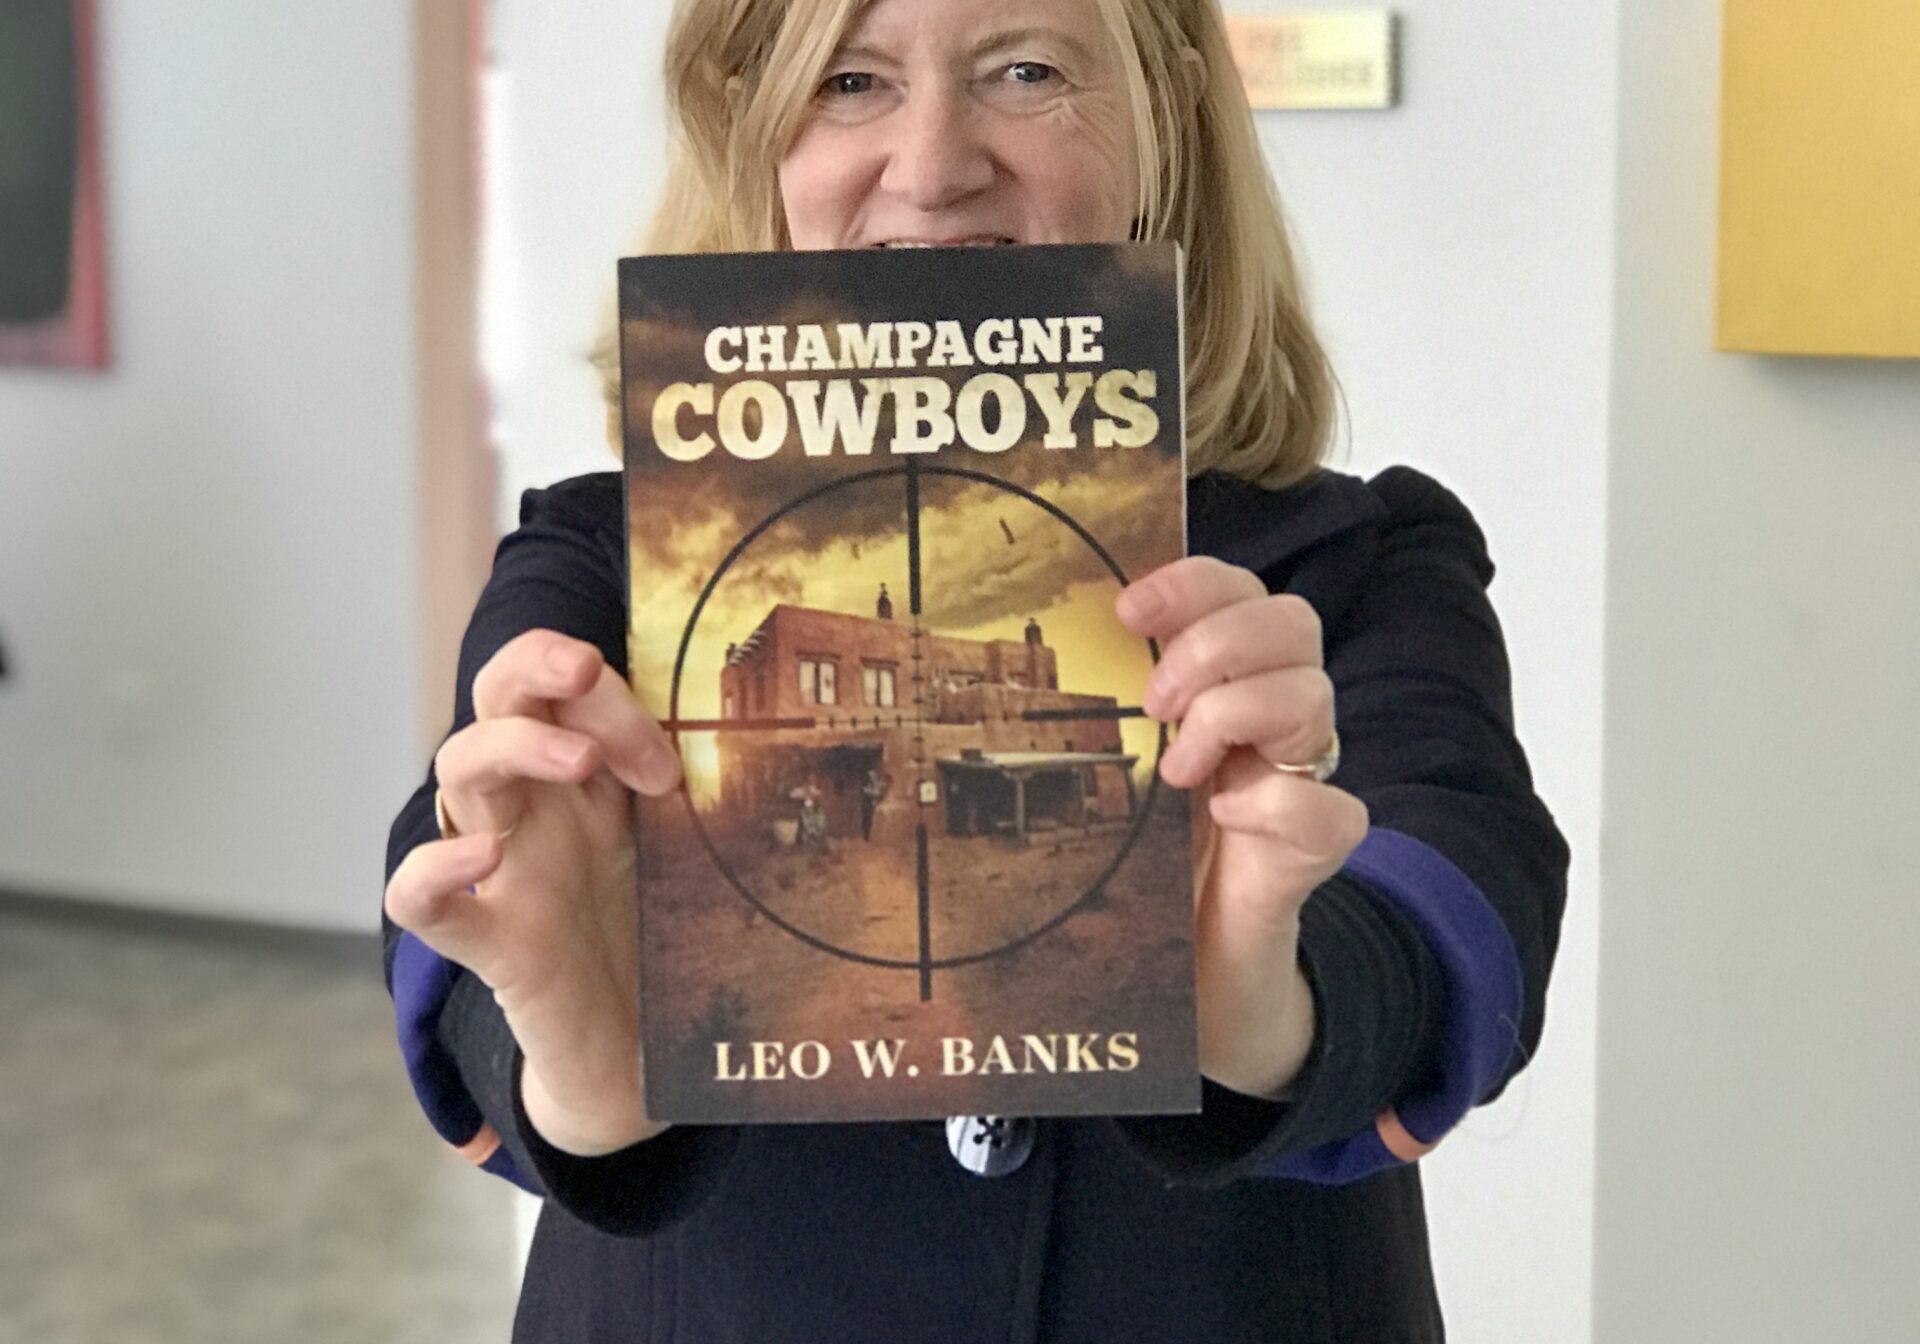 A fan with Champagne Cowboys